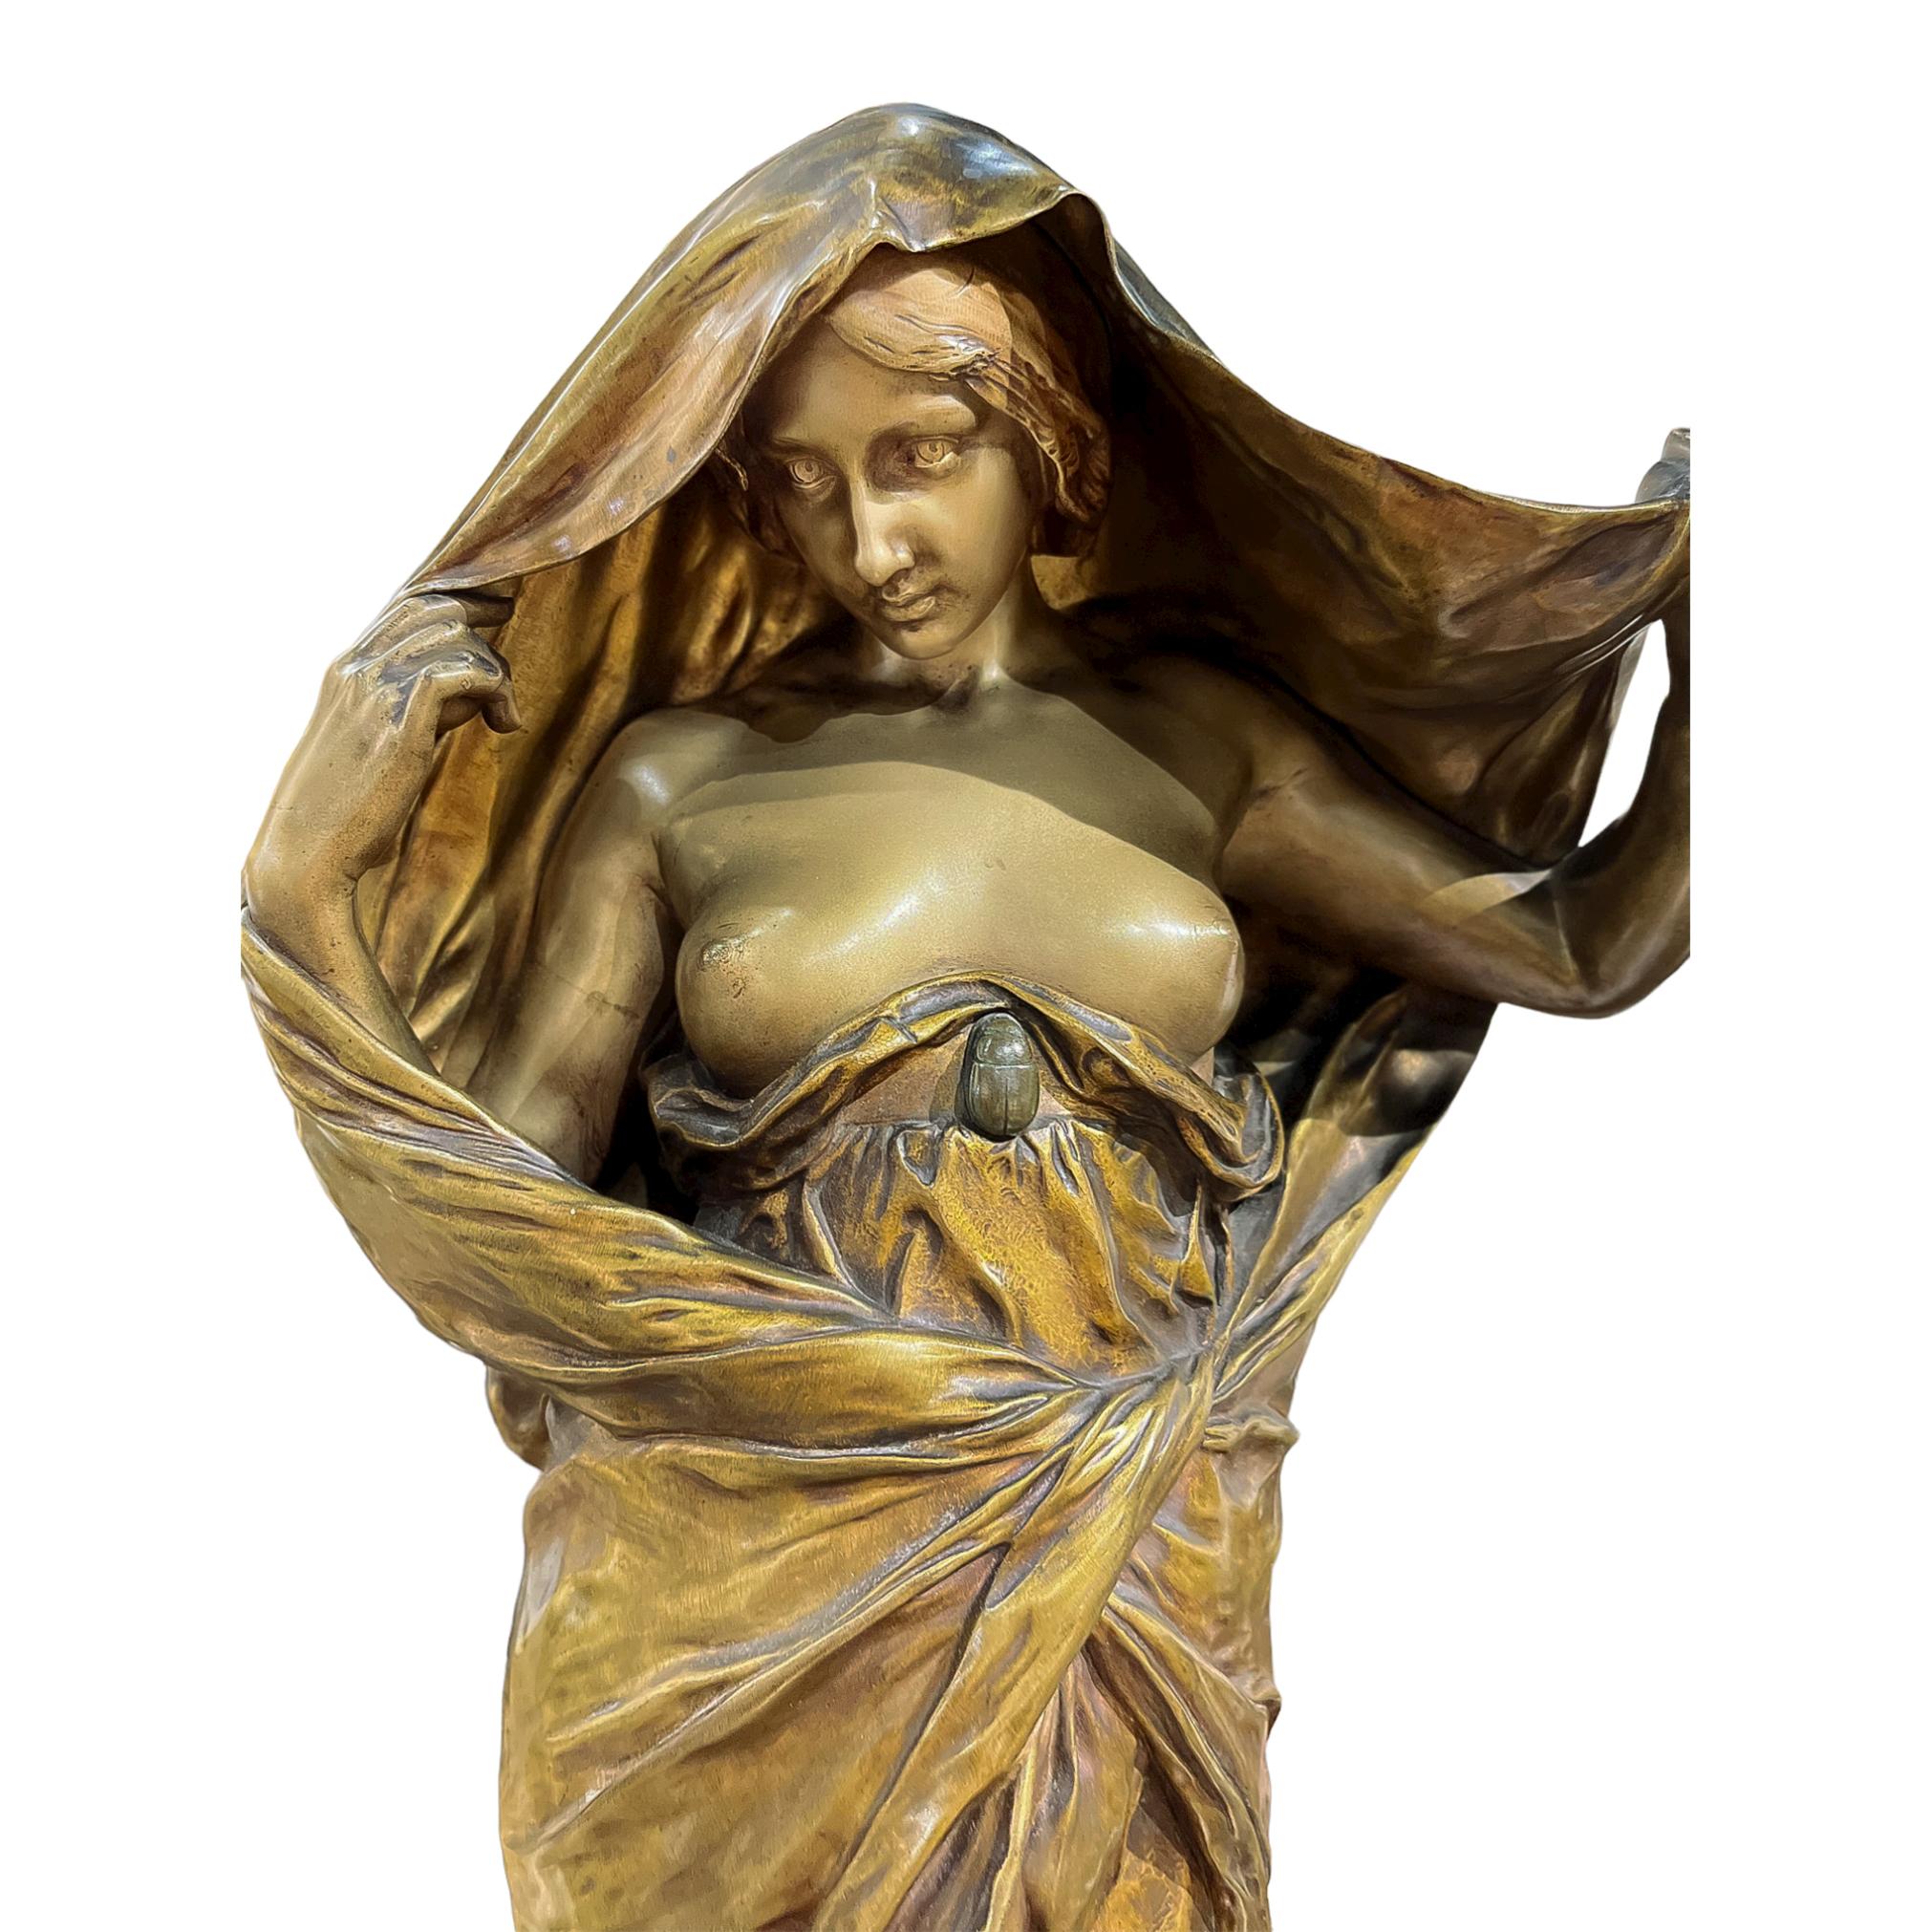 La Nature se dévoilant devant la Science (Nature revealing herself before Science)

Nature unsheathes herself from a golden cloak to reveal her chest with a beetle resting on her ribs.  

Artist : LOUIS-ERNEST BARRIAS (FRENCH, 1841-1905) 
inscribed